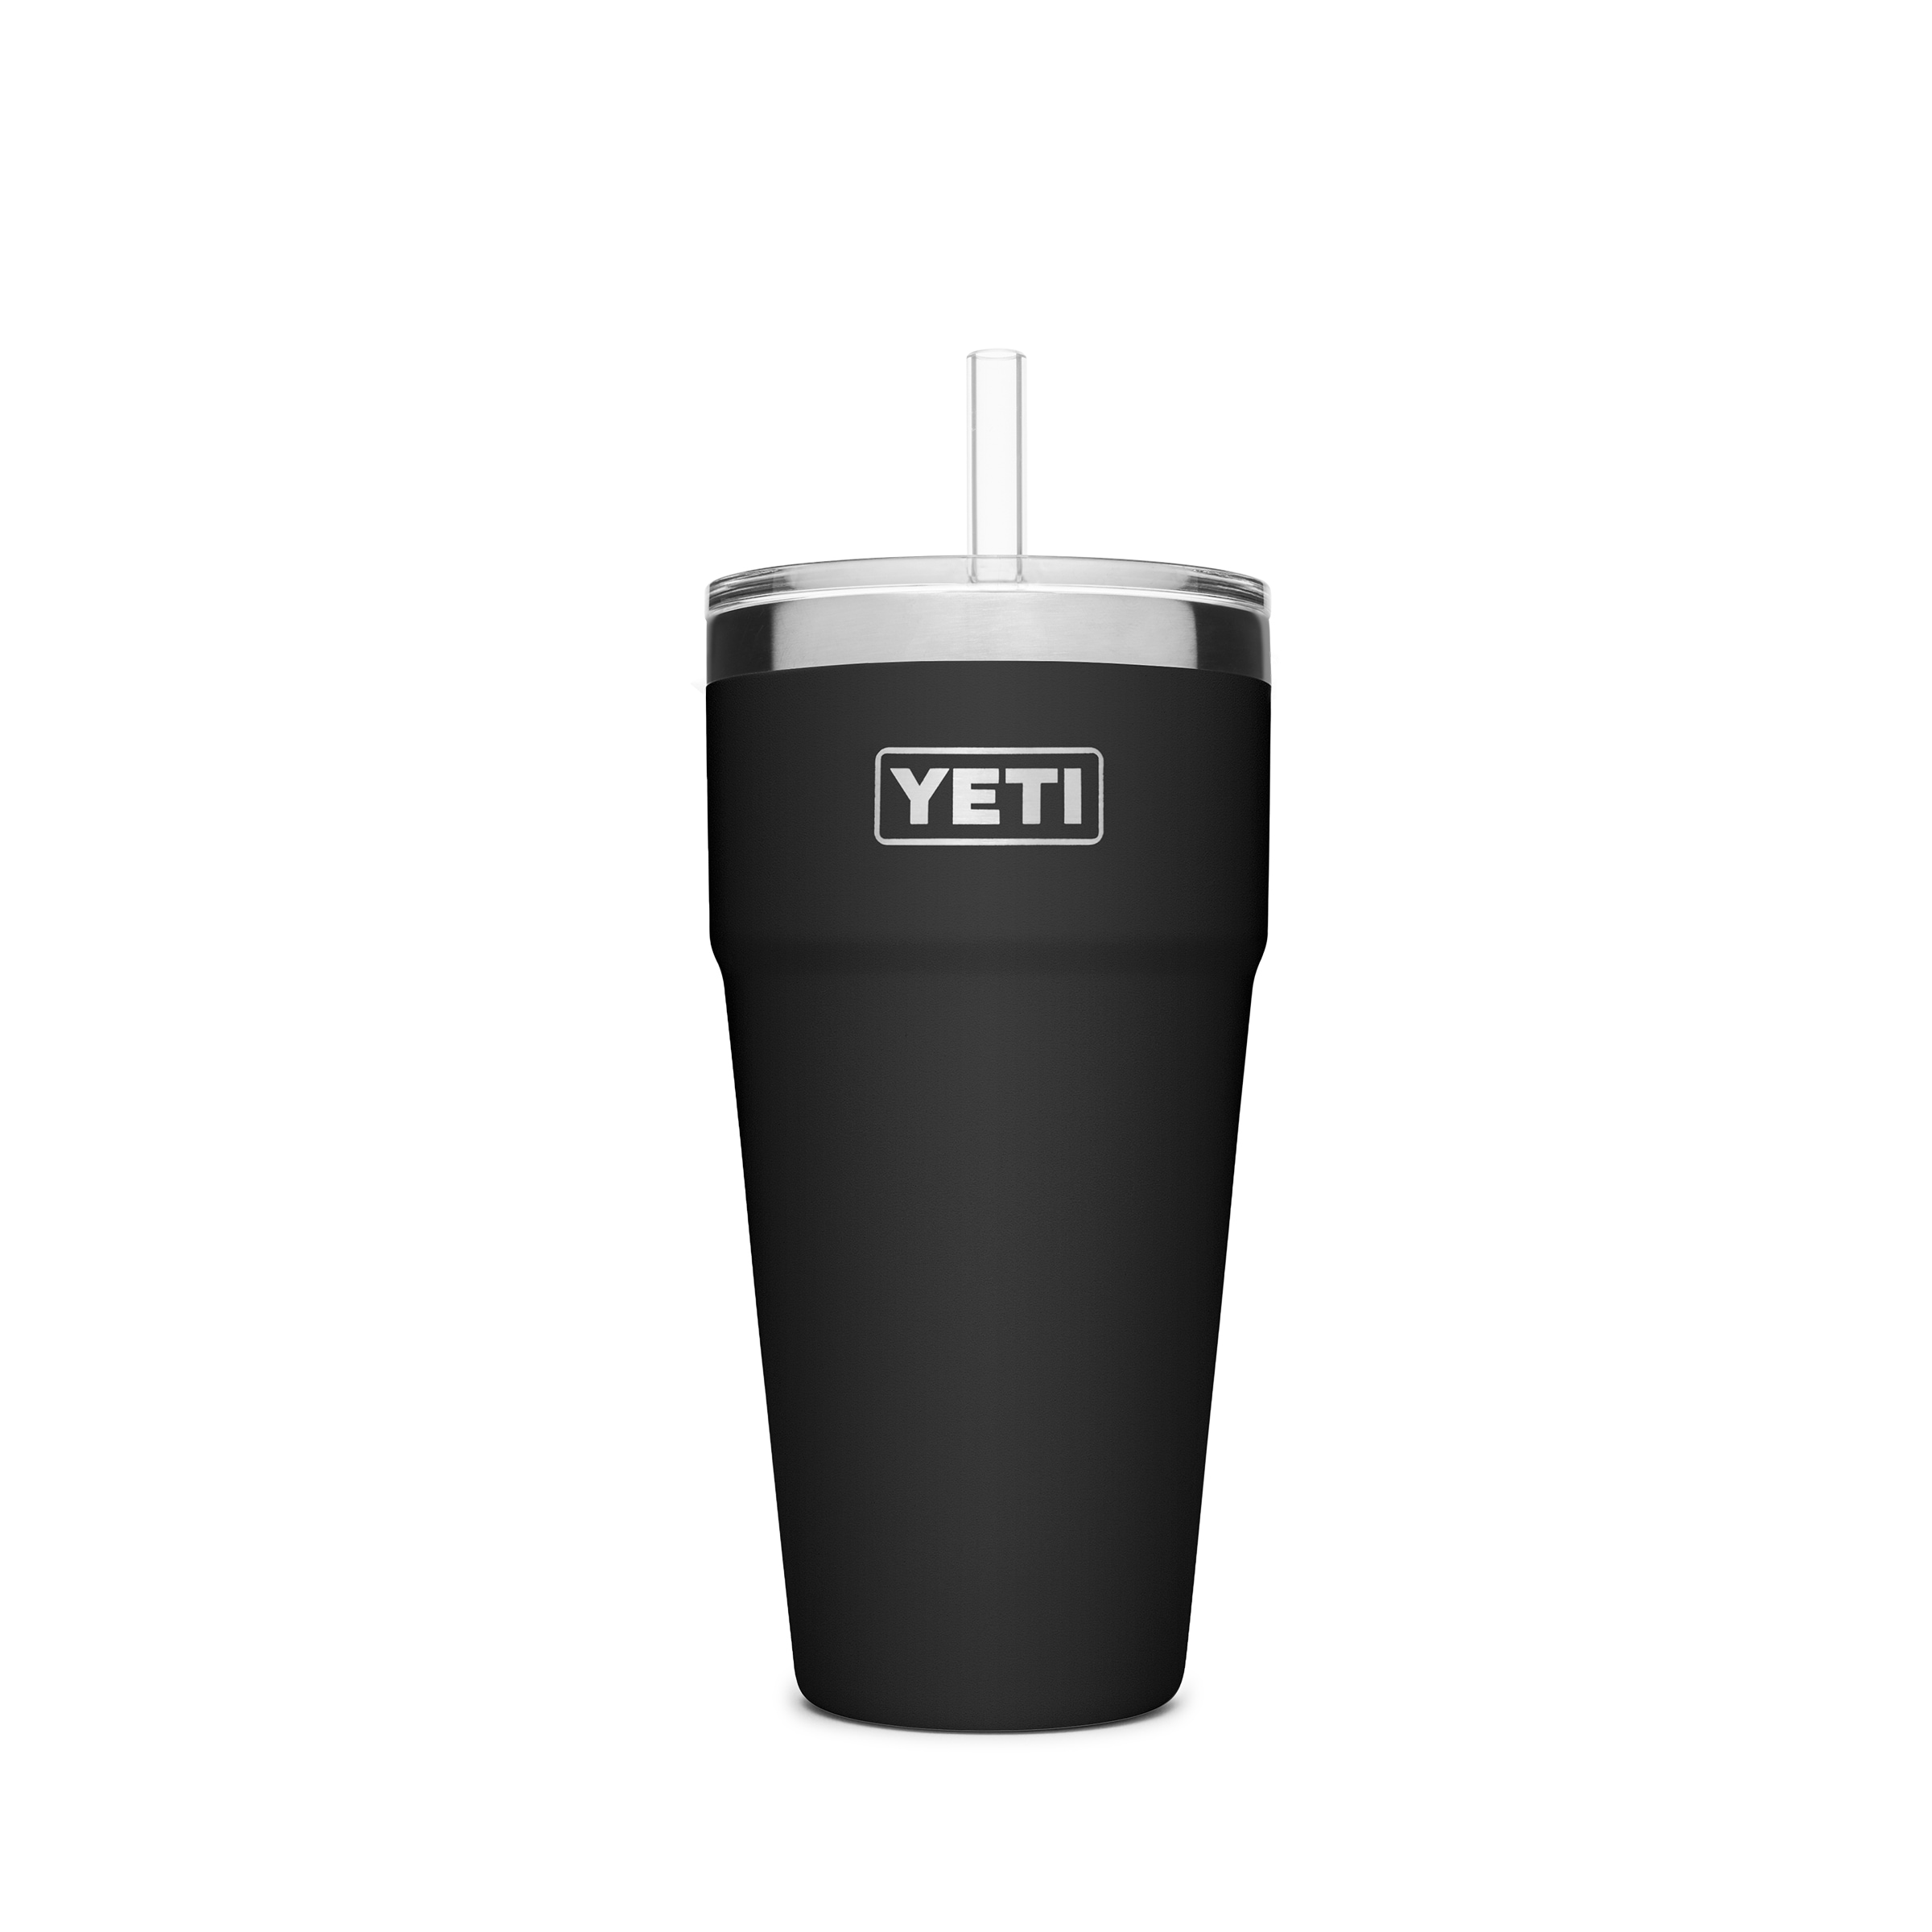 YETI Rambler 26-fl oz Stainless Steel Cup with Straw Lid at Lowes.com